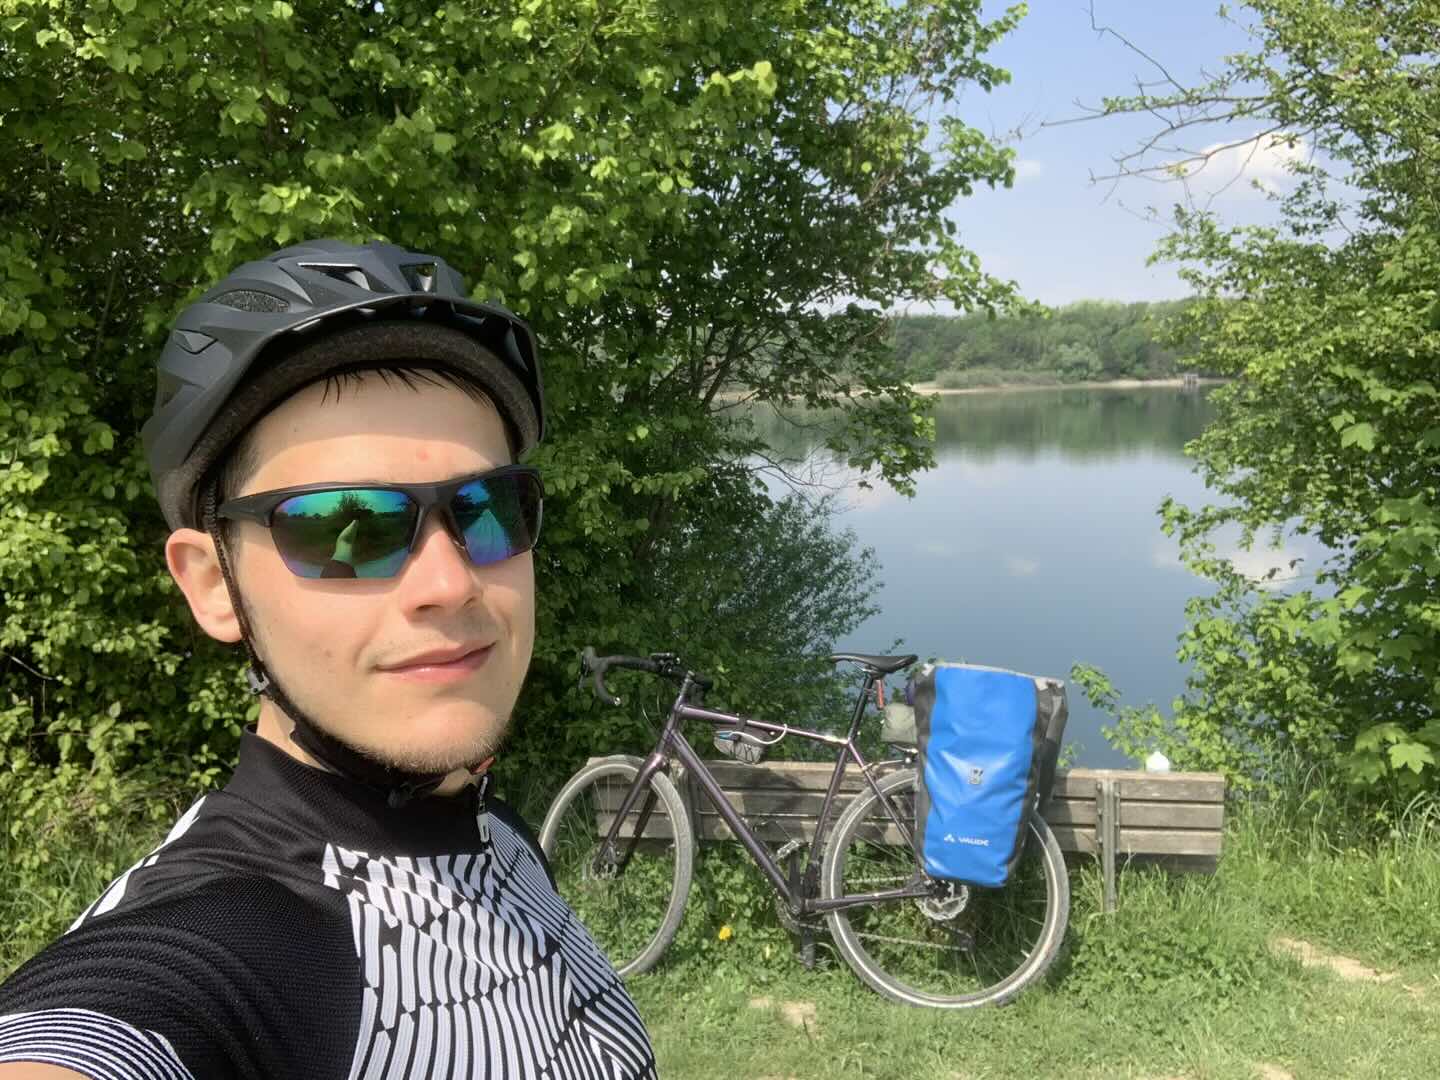 rene bergenroth in front of a lake with his bike